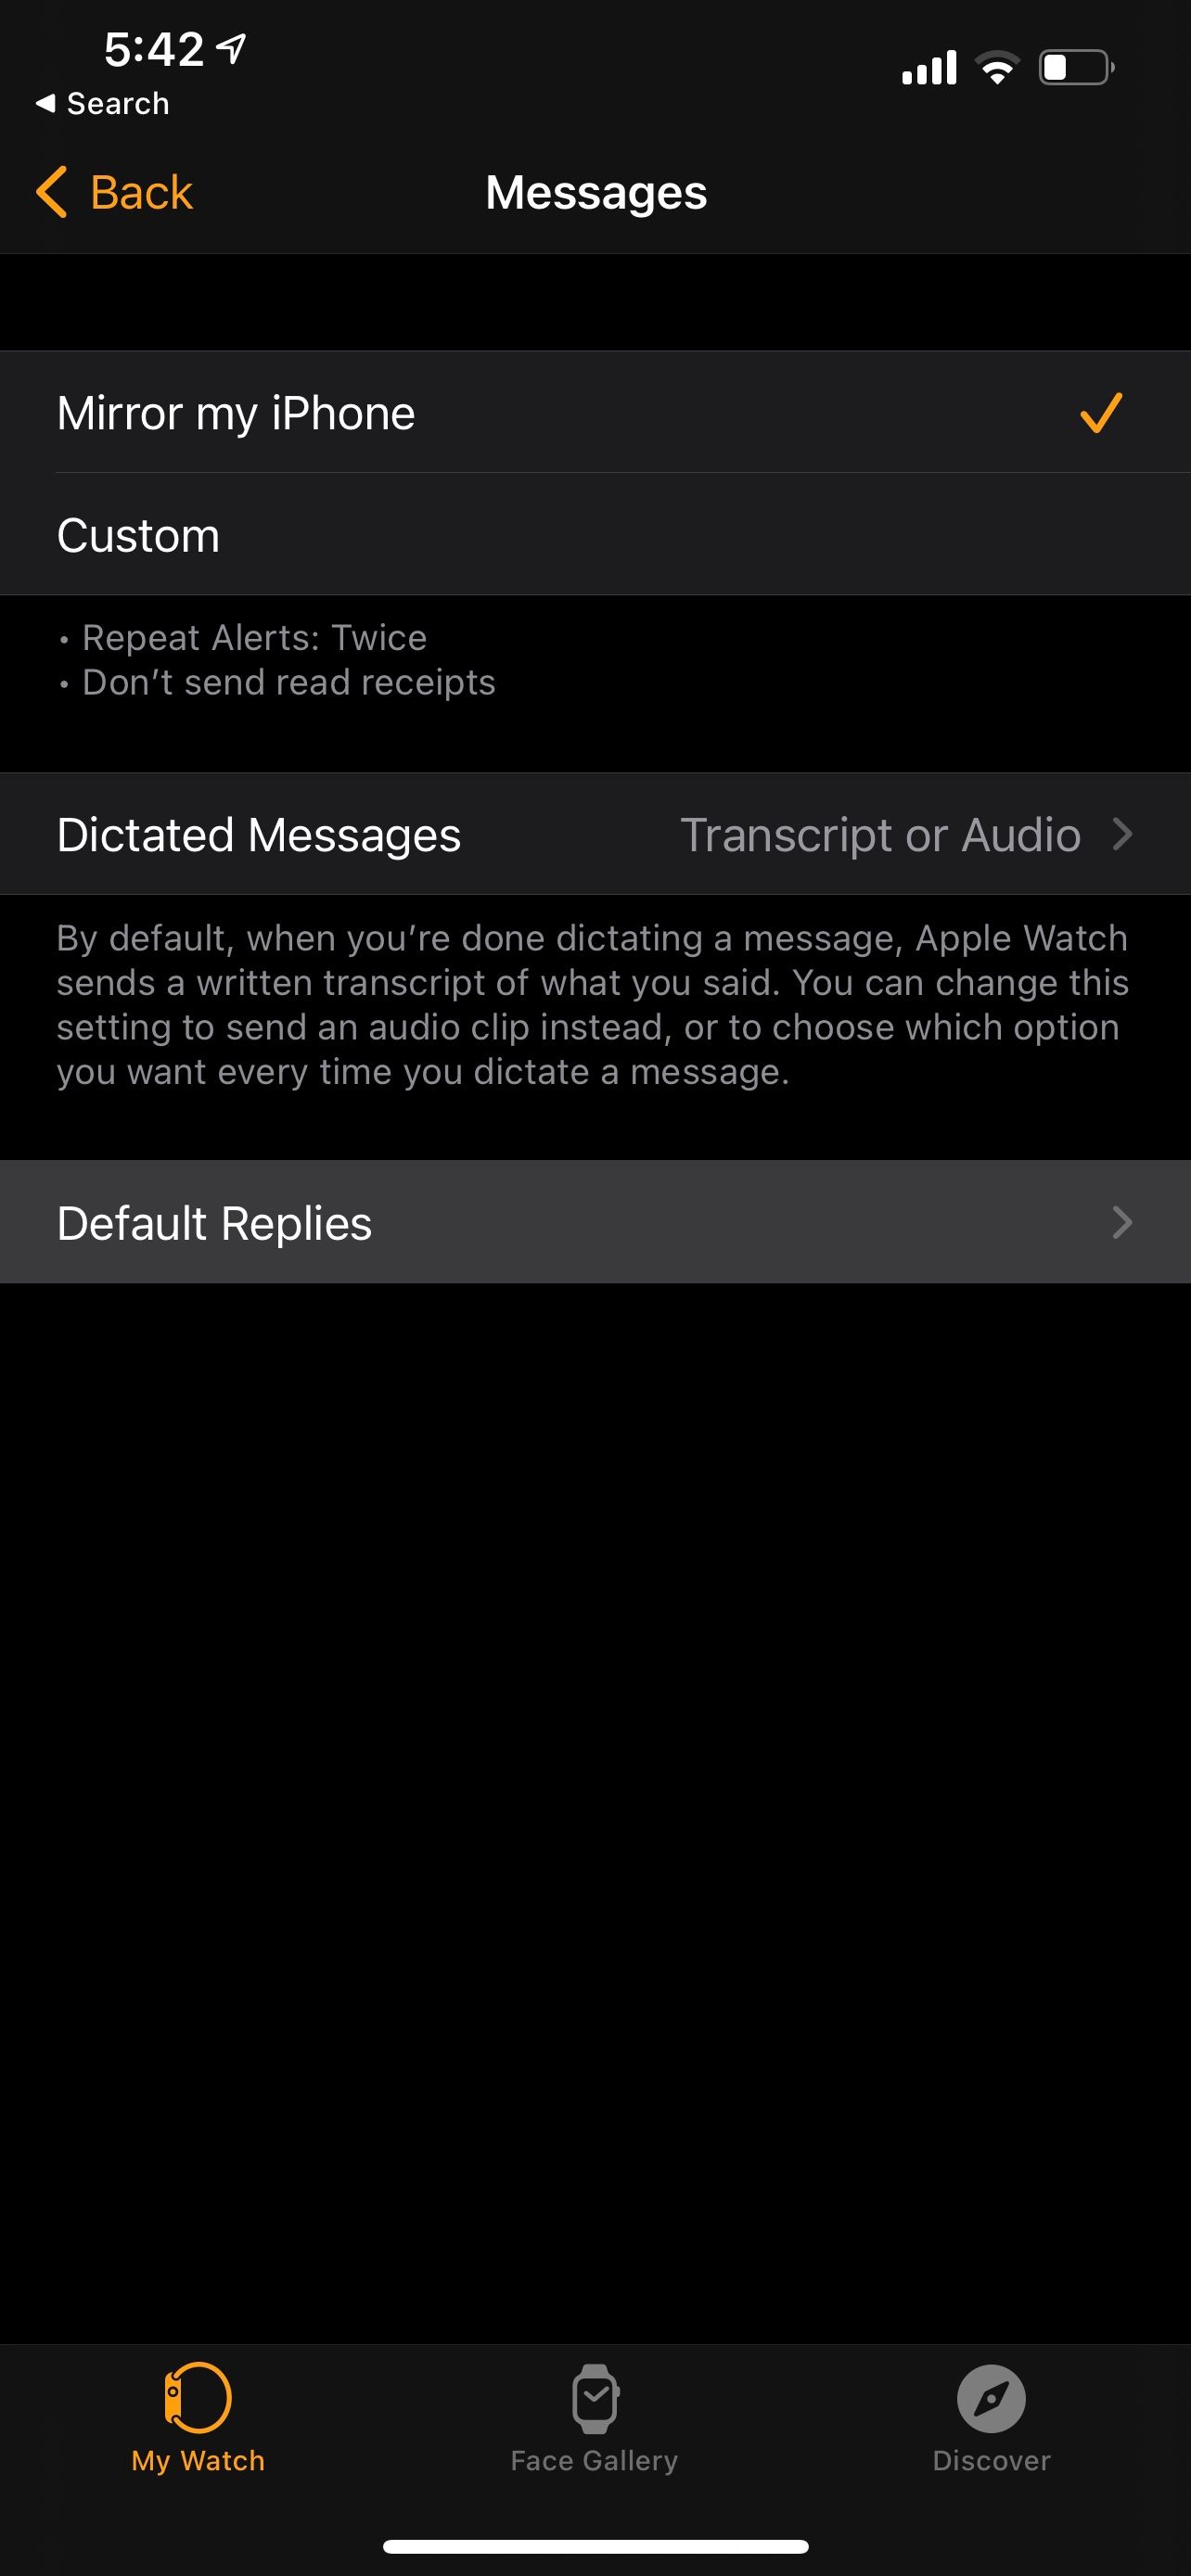 Apple Watch Messages app settings